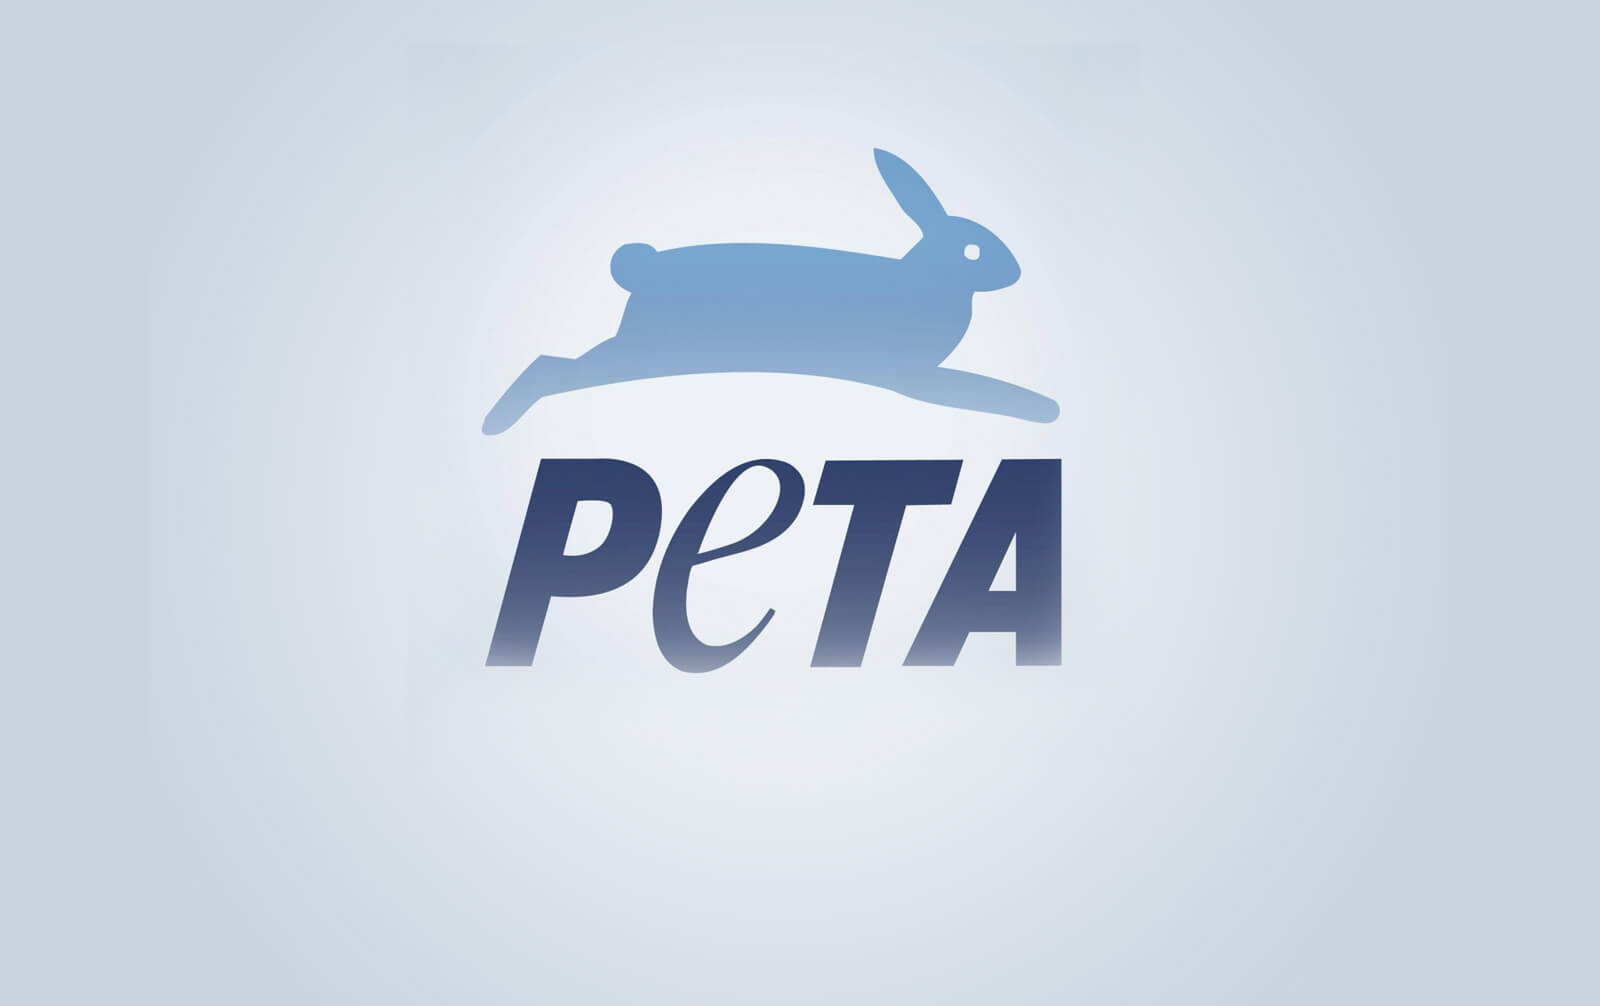 What's PETA's position on the Animal Liberation Front (ALF)? | PETA